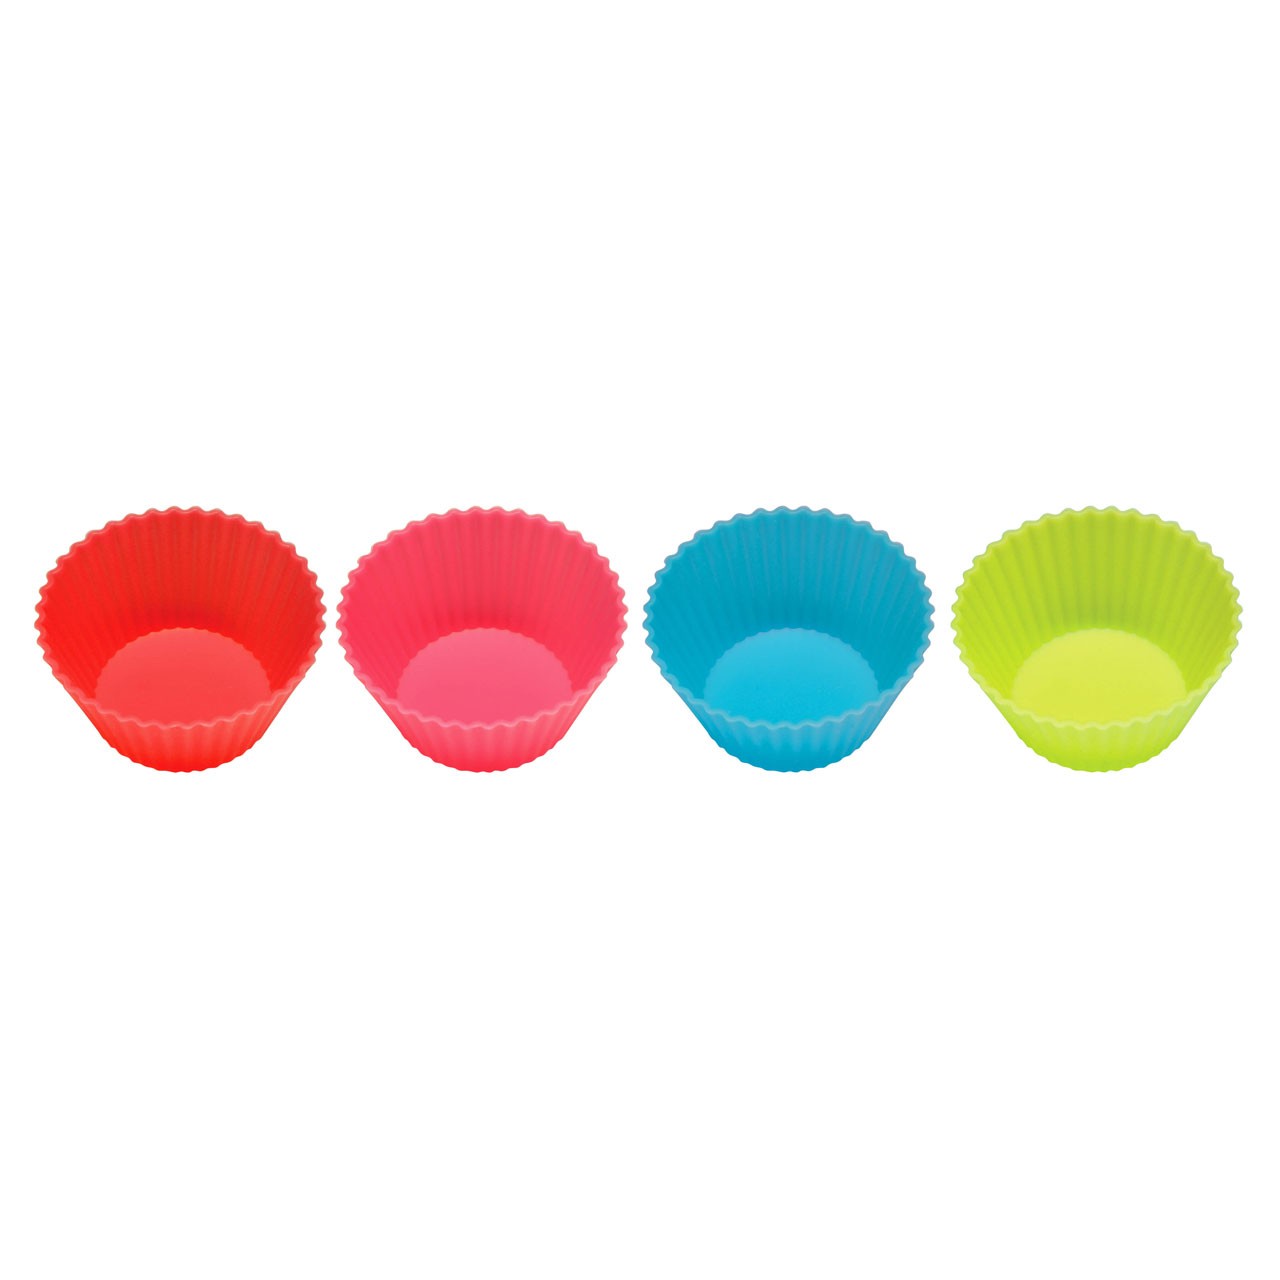 Round Moulds Set of 4 Silicone